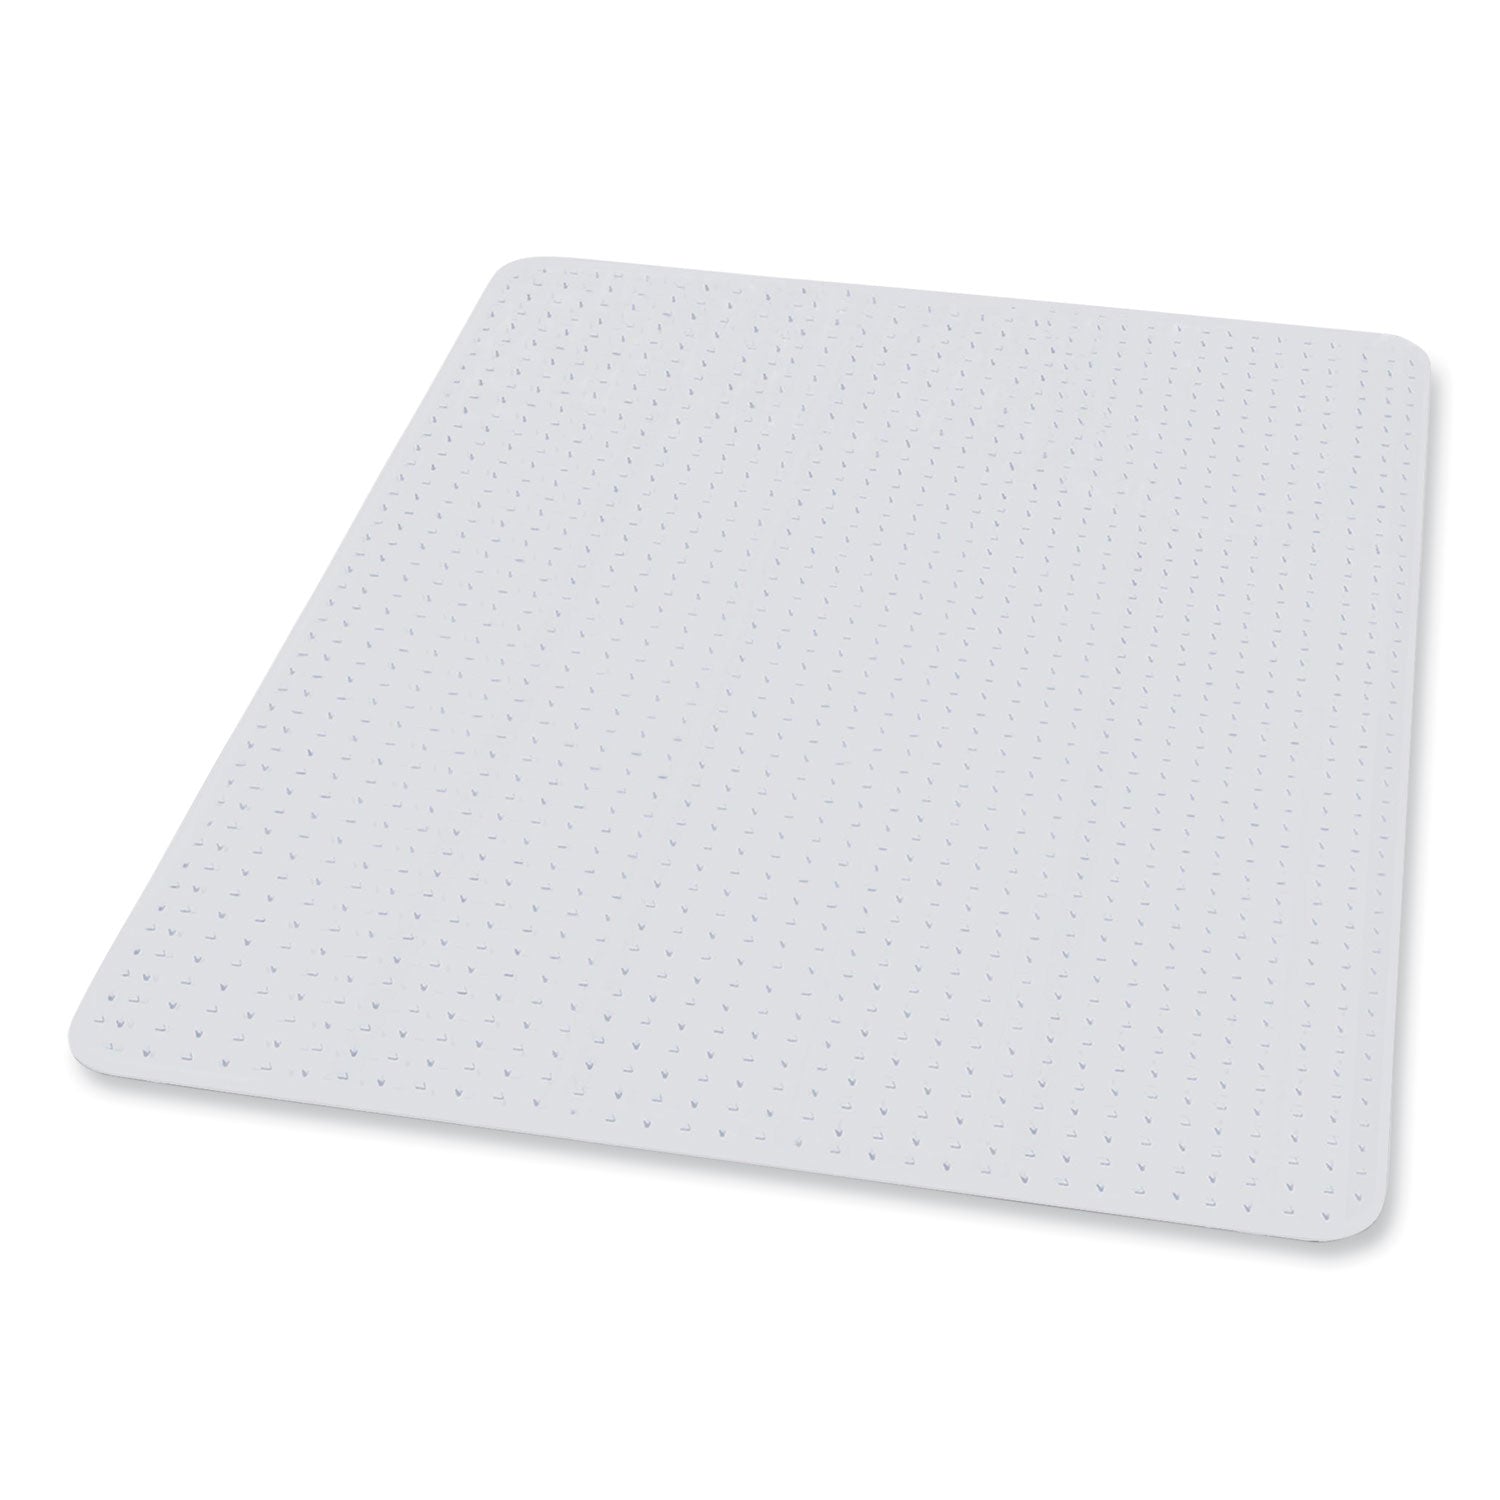 everlife-chair-mat-for-medium-pile-carpet-36-x-48-clear-ships-in-4-6-business-days_esr122081 - 1